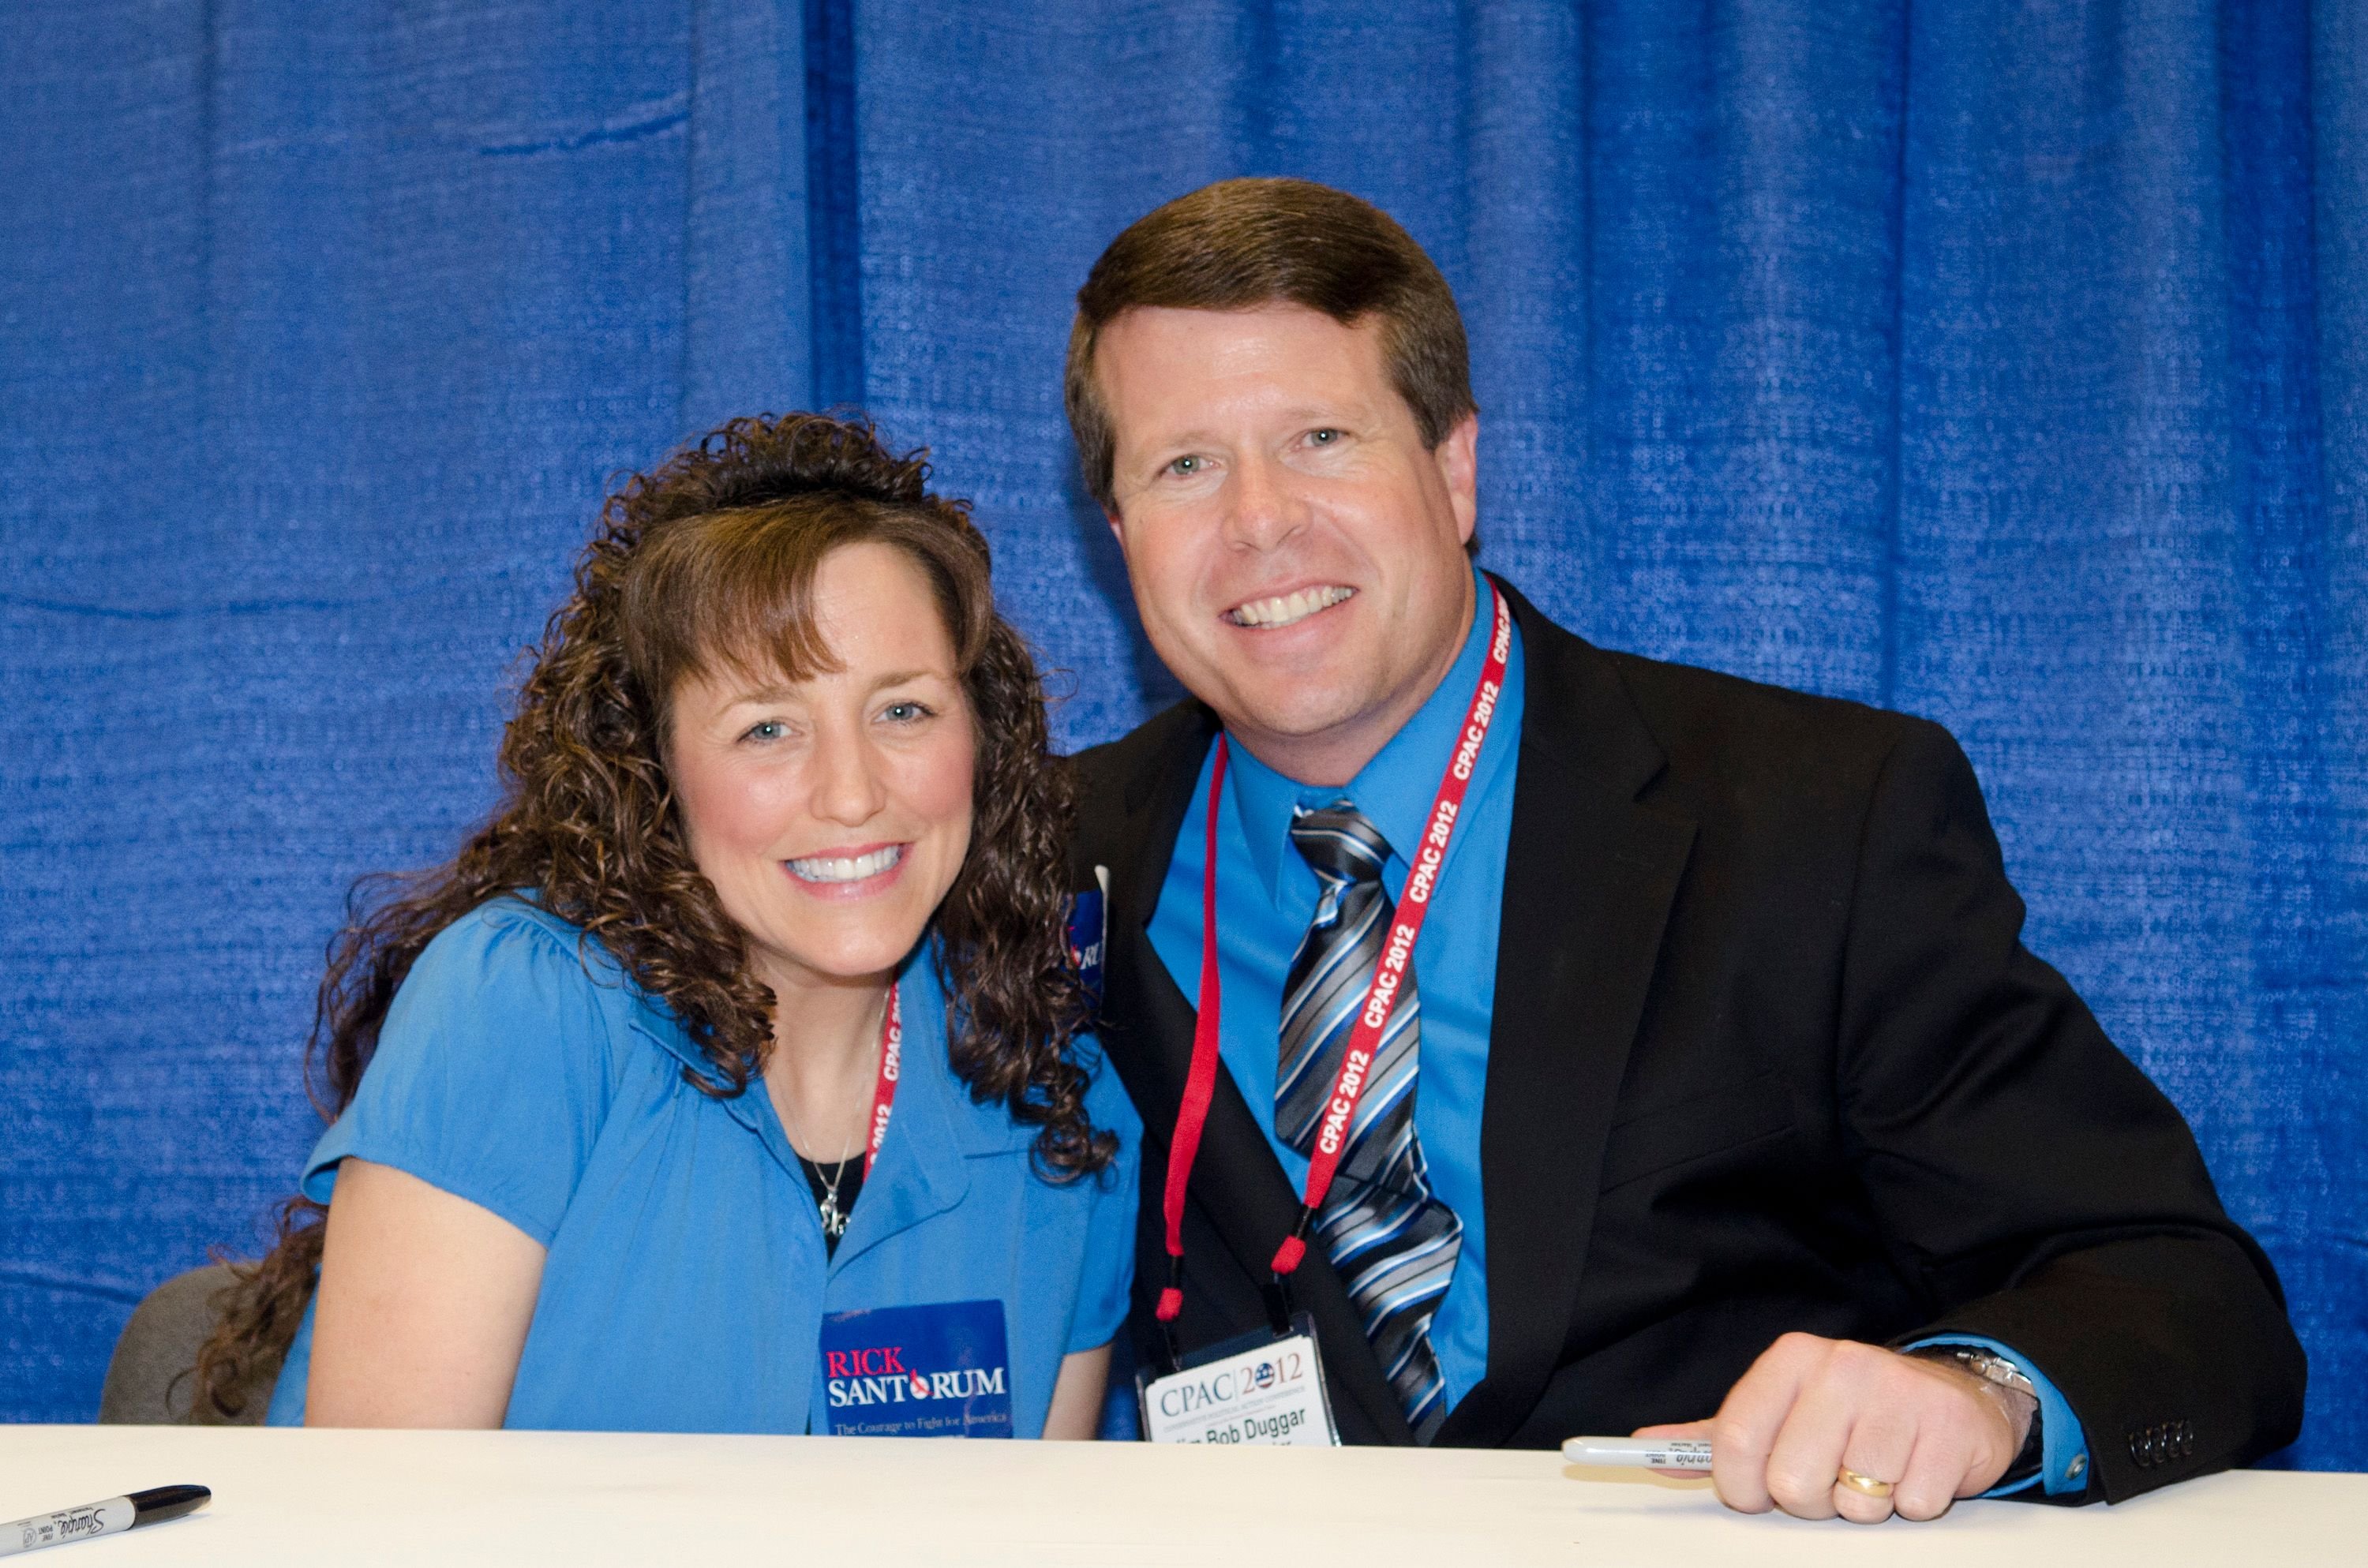 Michelle Duggar and Jim Bob Duggar promote their book "A Love That Multiplies" during the Conservative Political Action Conference (CPAC) at the Marriott Wardman Park on February 10, 2012 | Photo: Getty Images